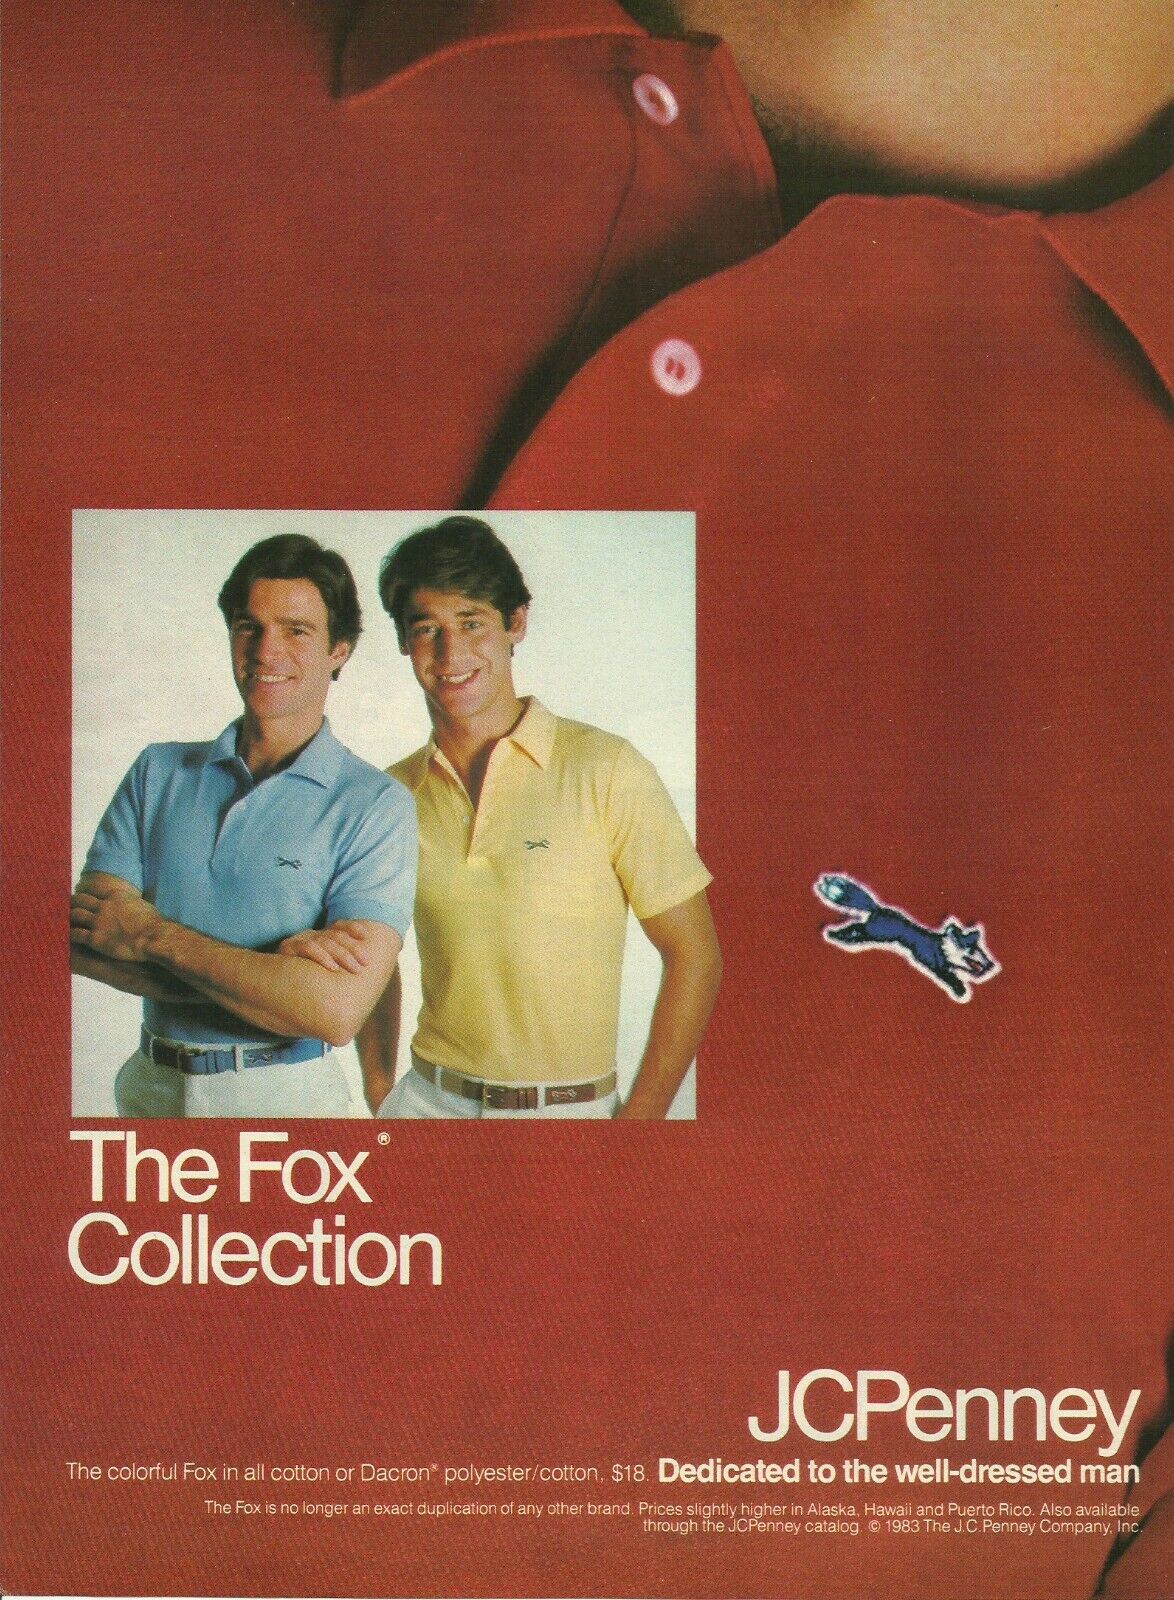 1983 JC Penney The Fox Collection Mens Shirts vintage print ad advertisement